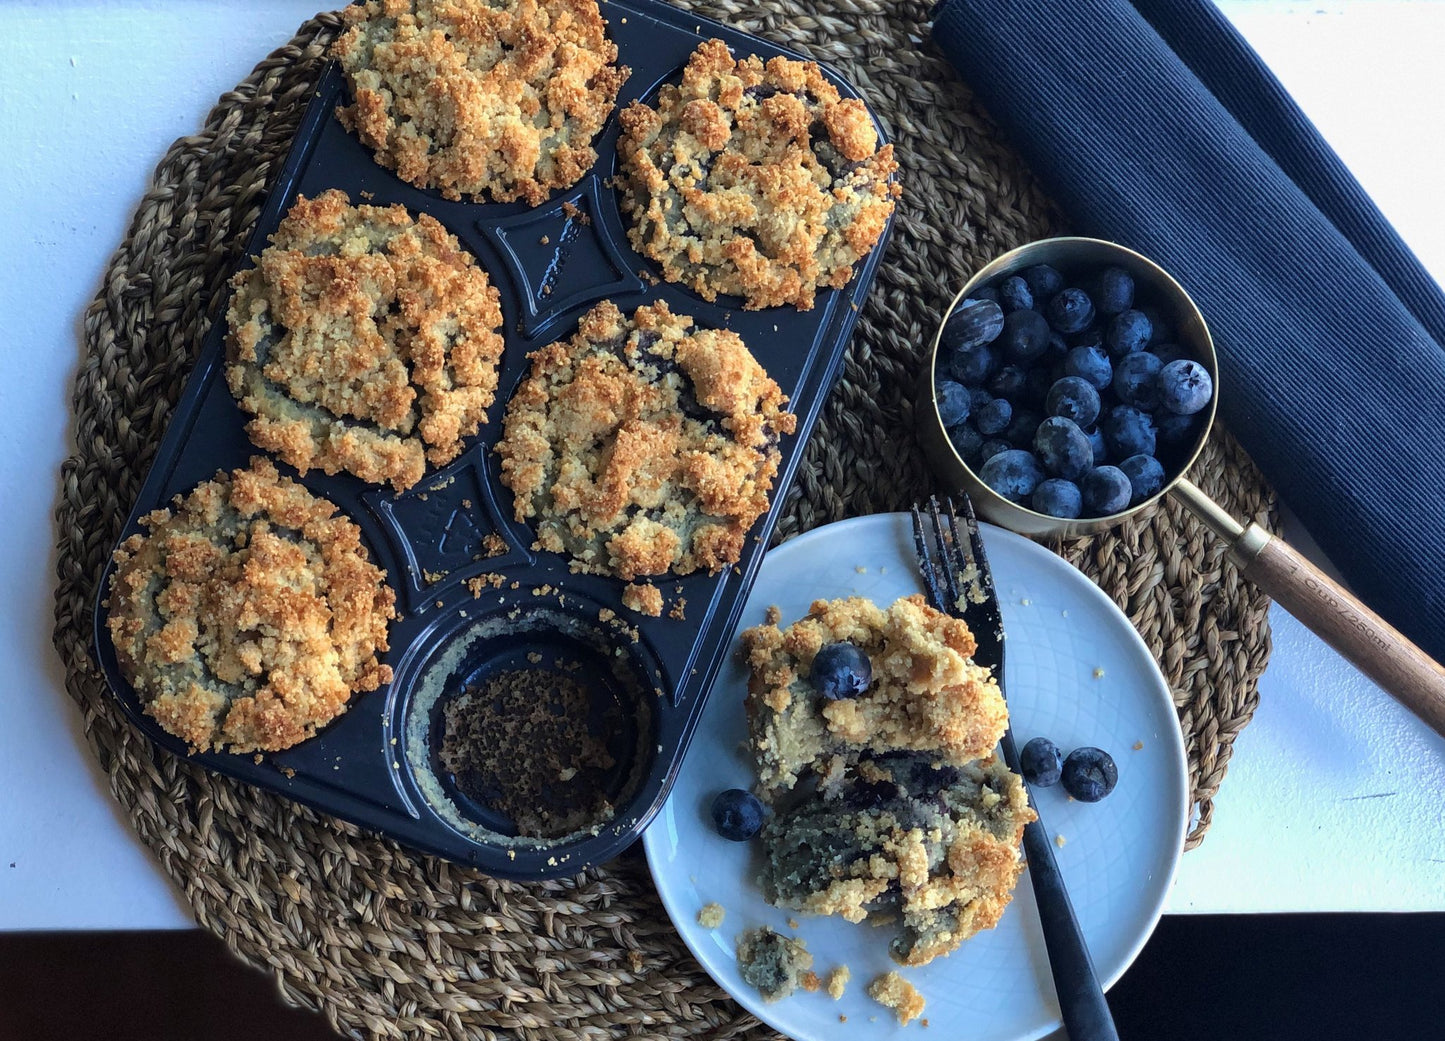 Muffins - Blueberry Crumble Tumble